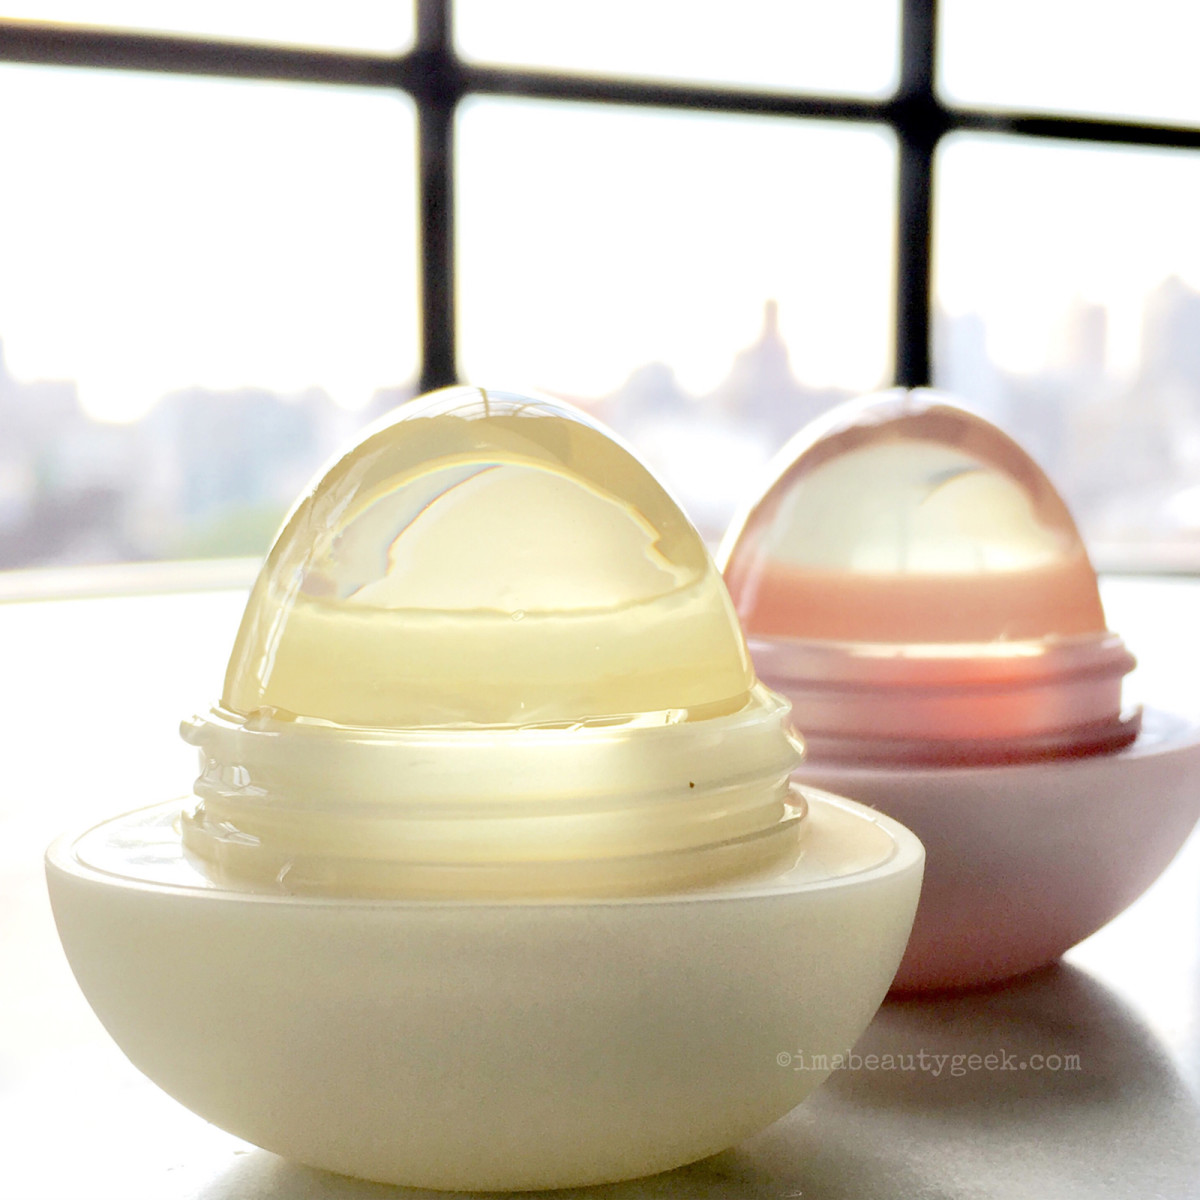 One more time: EOS Crystal Lip Balm in Vanilla Orchid and Hibiscus Peach